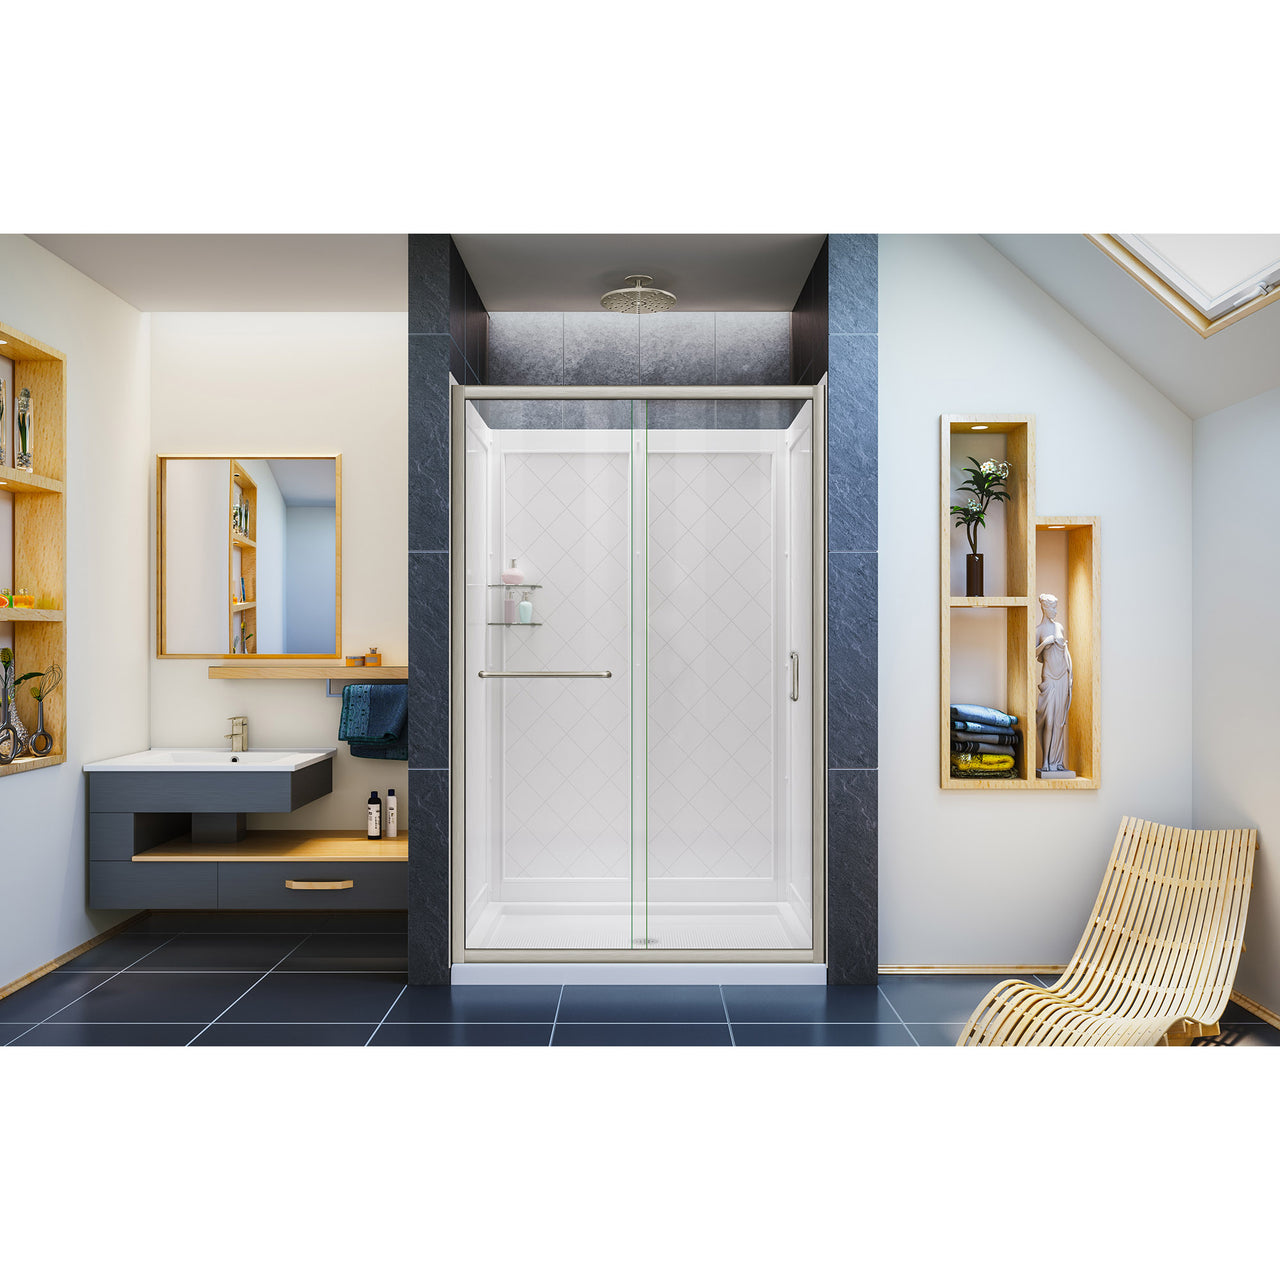 DreamLine Infinity-Z 36 in. D x 48 in. W x 76 3/4 in. H Semi-Frameless Sliding Shower Door, Shower Base and Q-WALL-5 Backwall Kit, Clear Glass - BNGBath